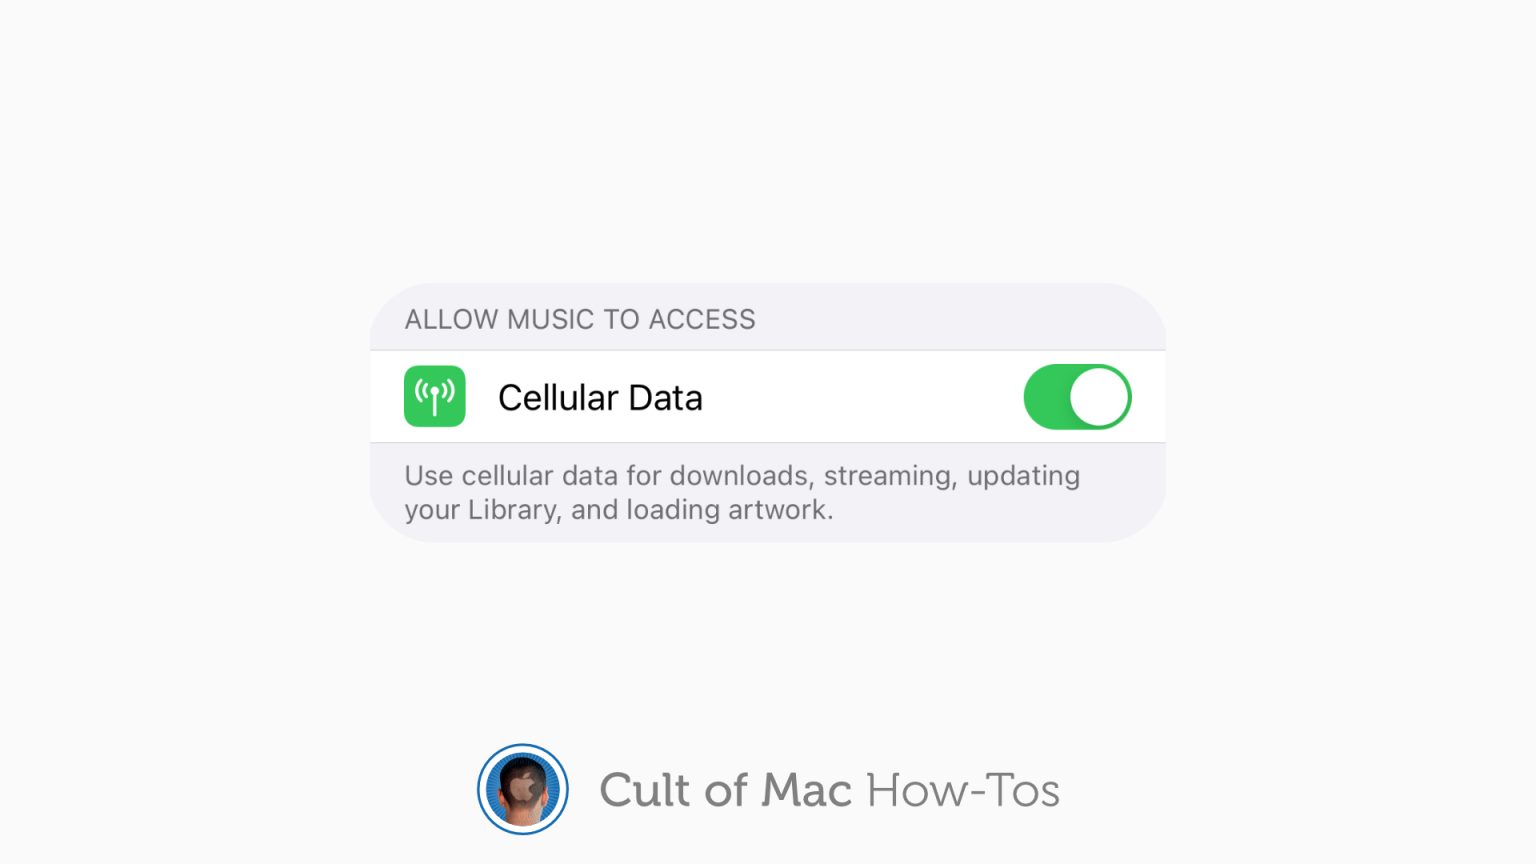 Enable Apple Music over cellular